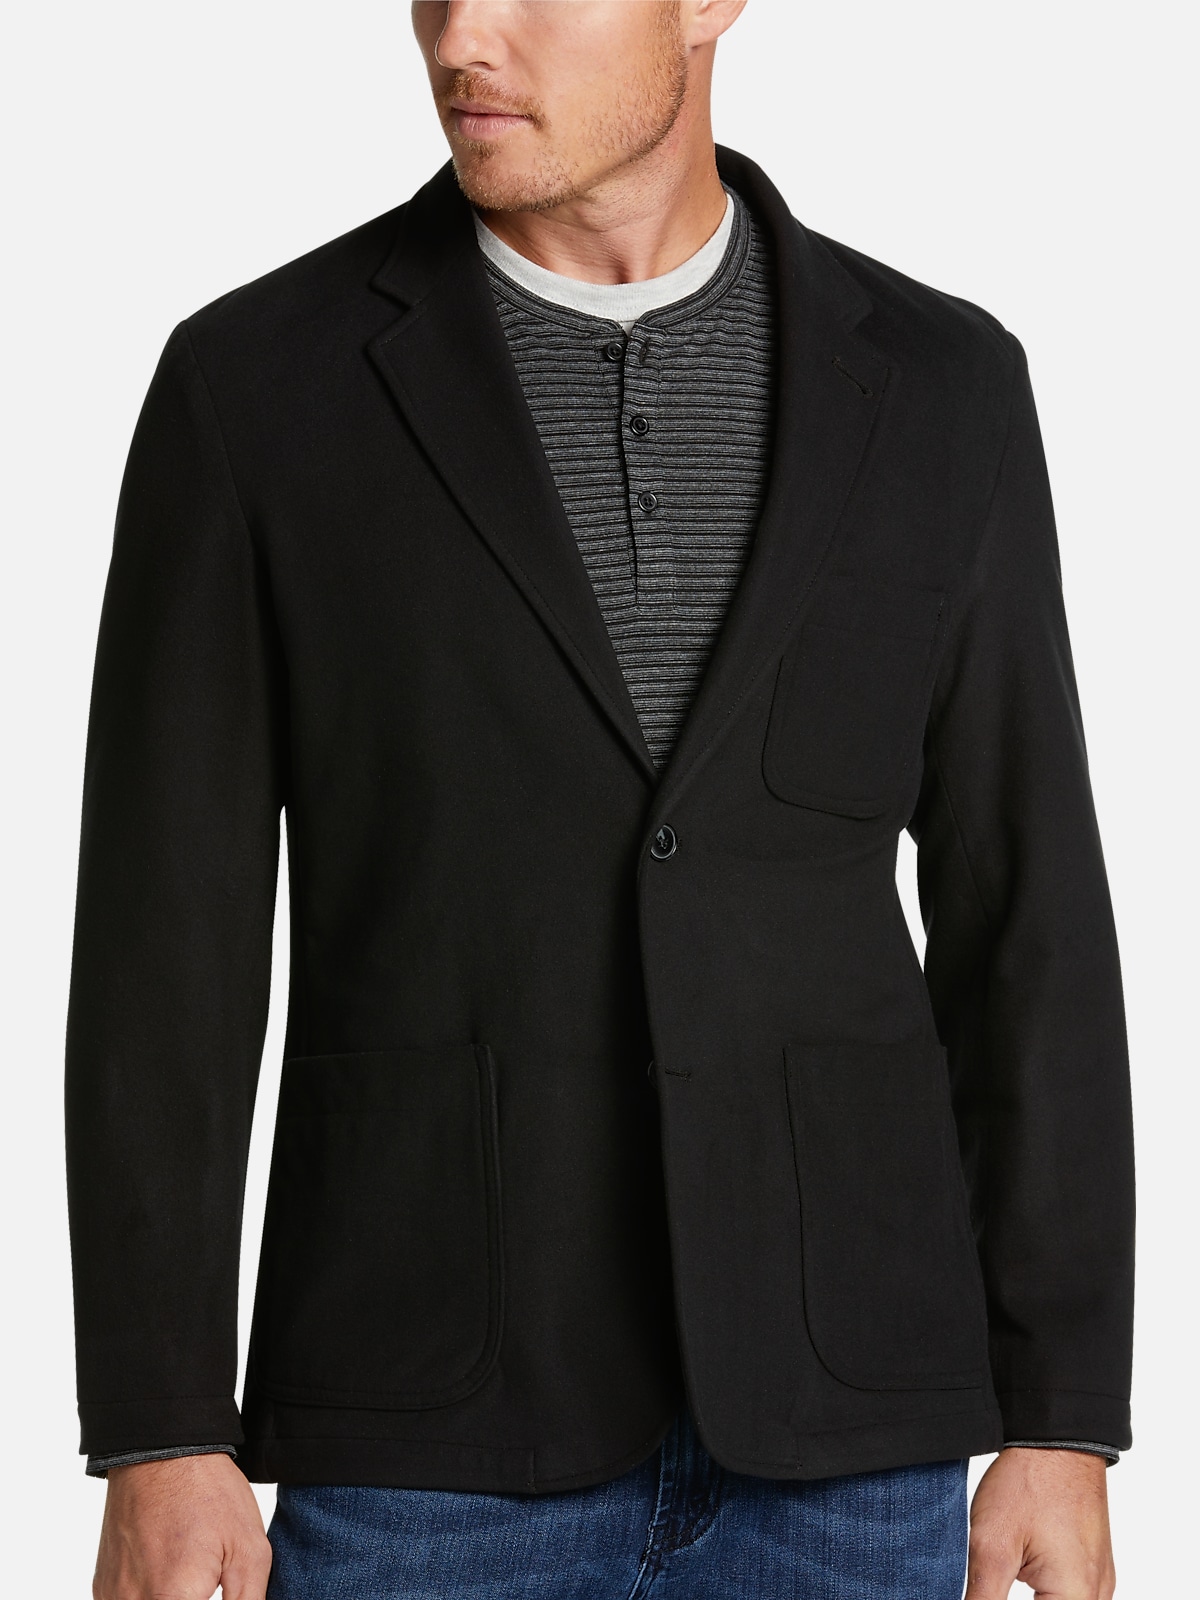 Michael Strahan Modern Fit Soft Jacket All Clearance 3999 Mens Wearhouse 